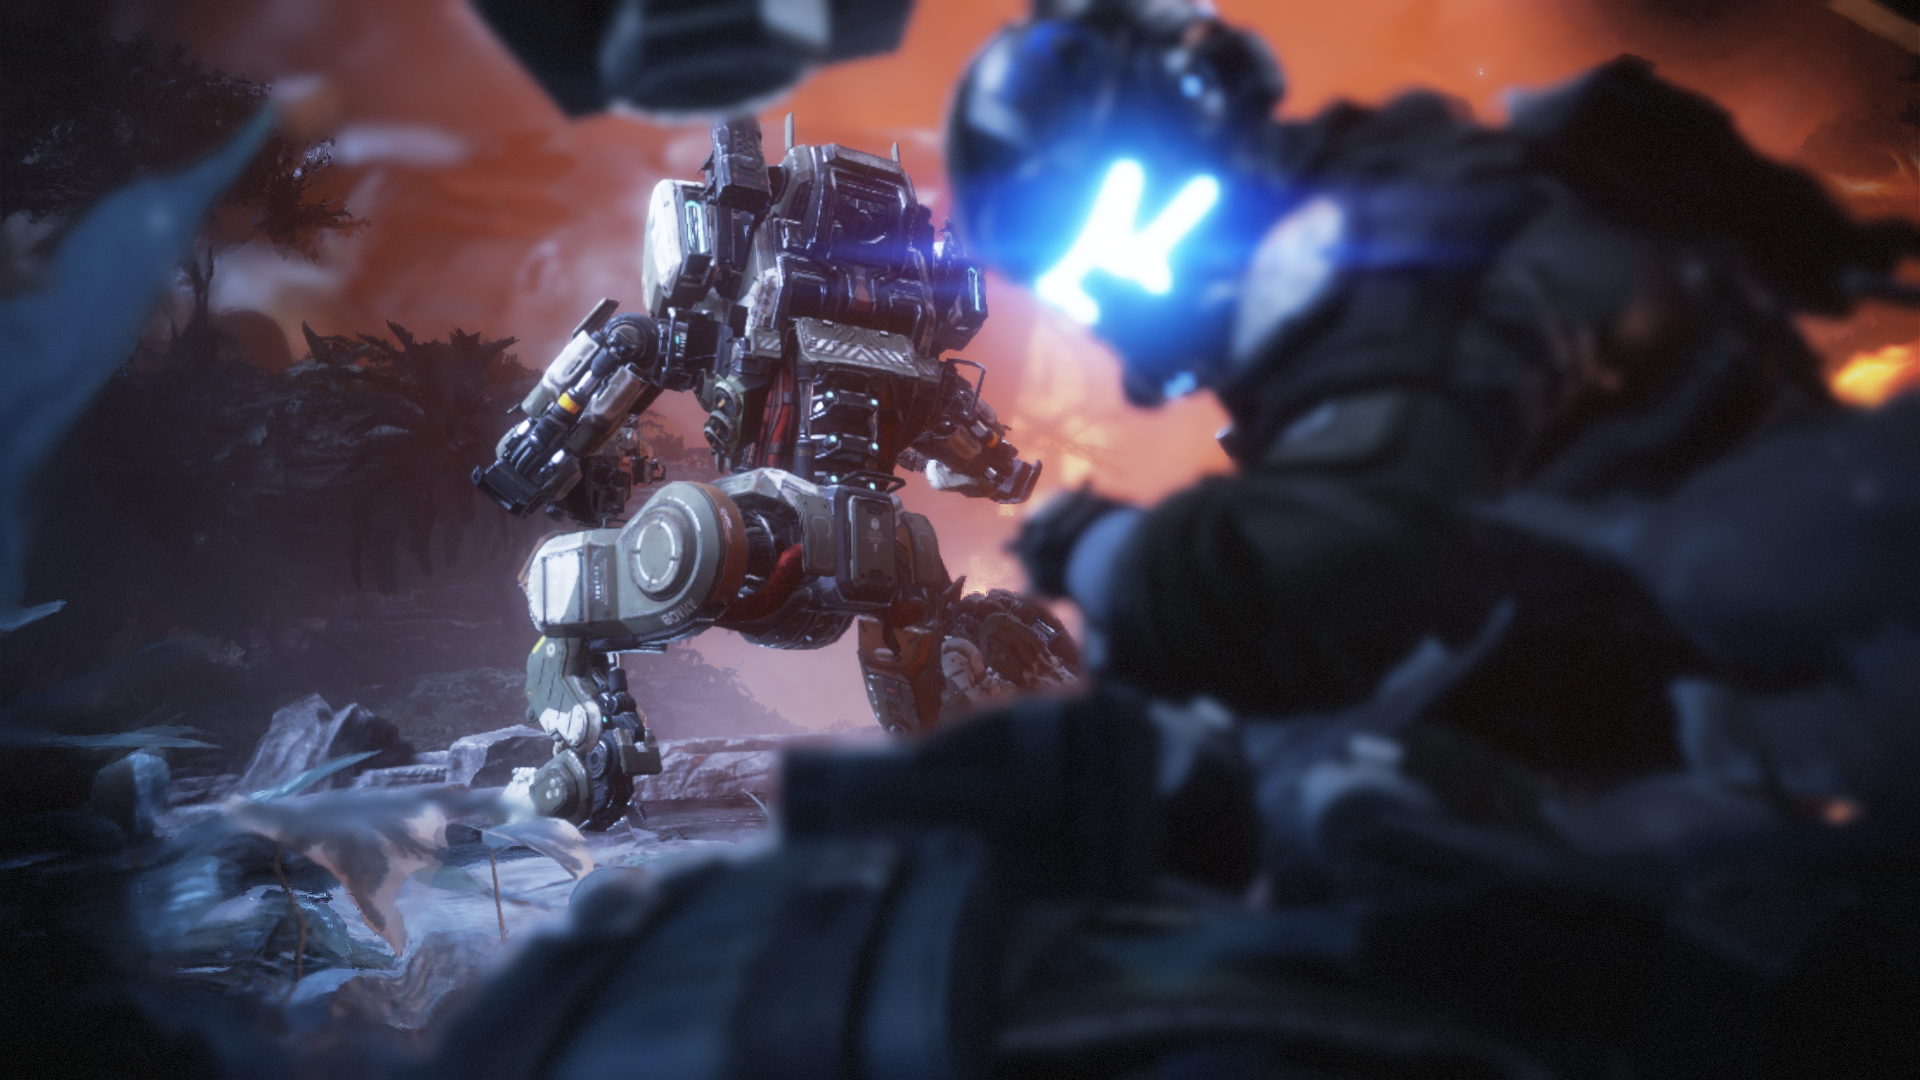 General 1920x1080 Titanfall 2 Titanfall video games video game art science fiction